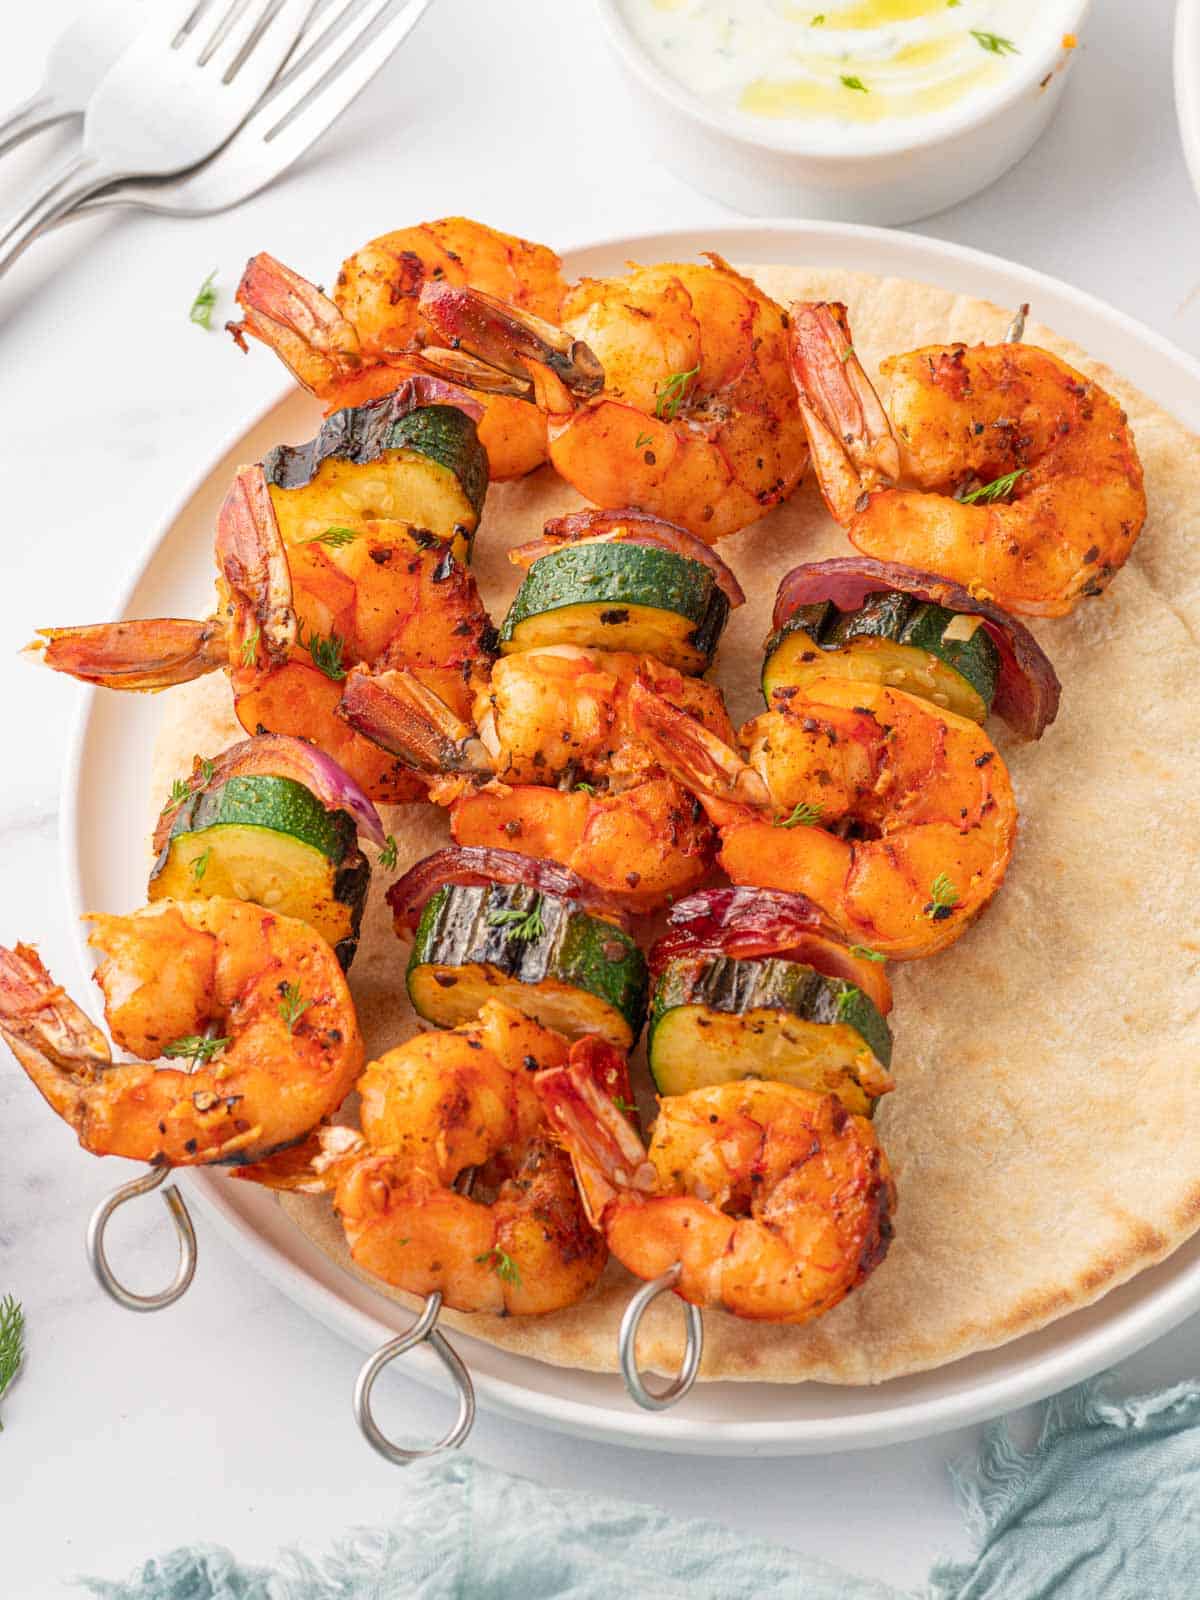 Three shrimp skewers on a pita with dipping sauce.